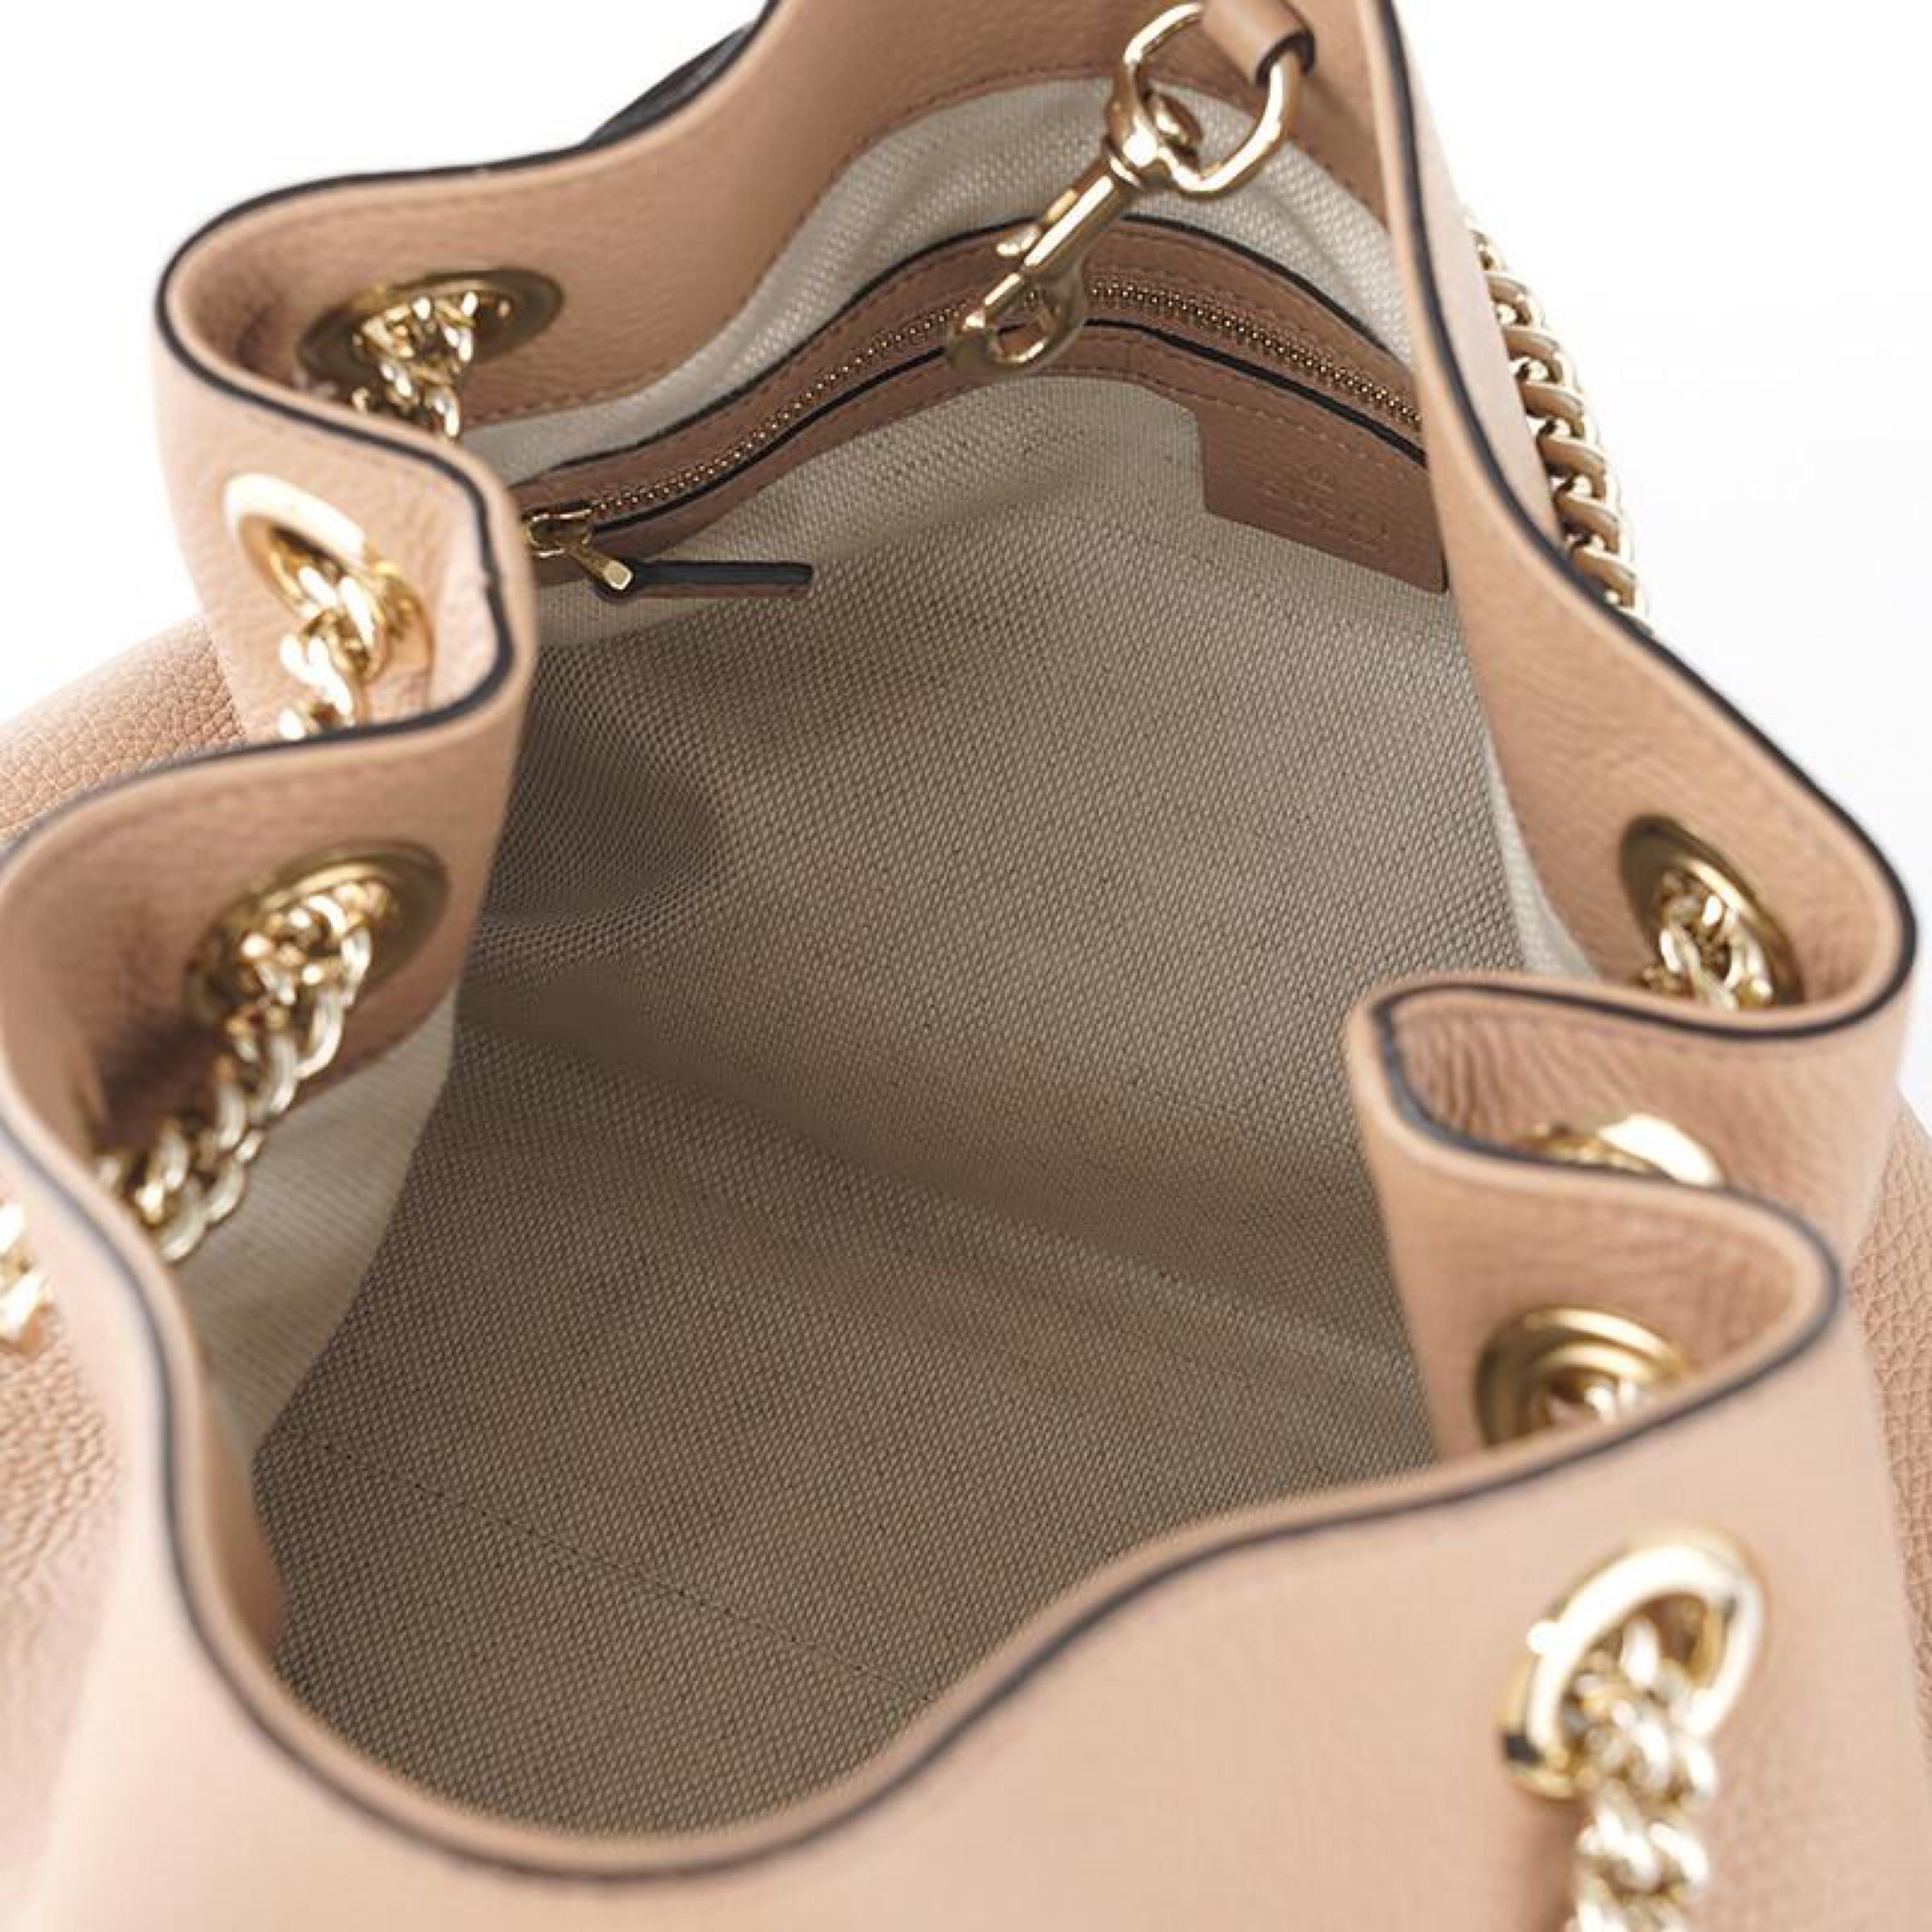 NEW Gucci Beige Pebbled Leather Medium Soho Chain Tote Shoulder Bag For Sale 6